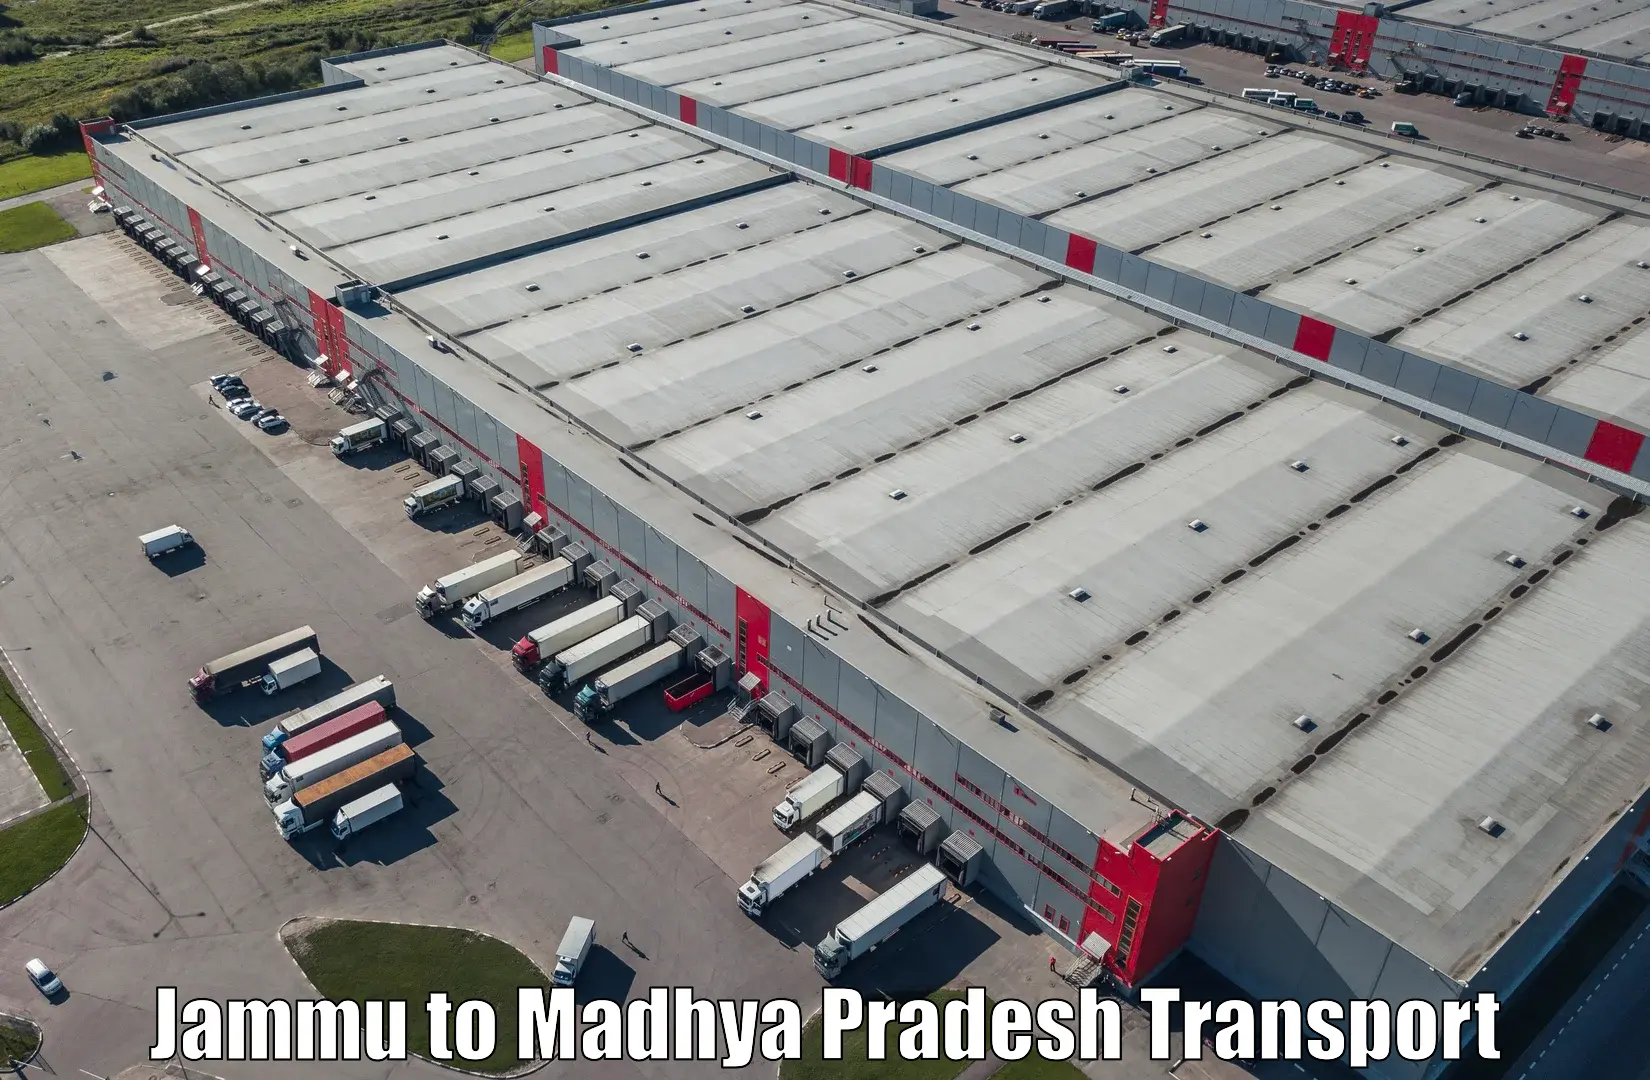 Goods transport services in Jammu to Amarpatan